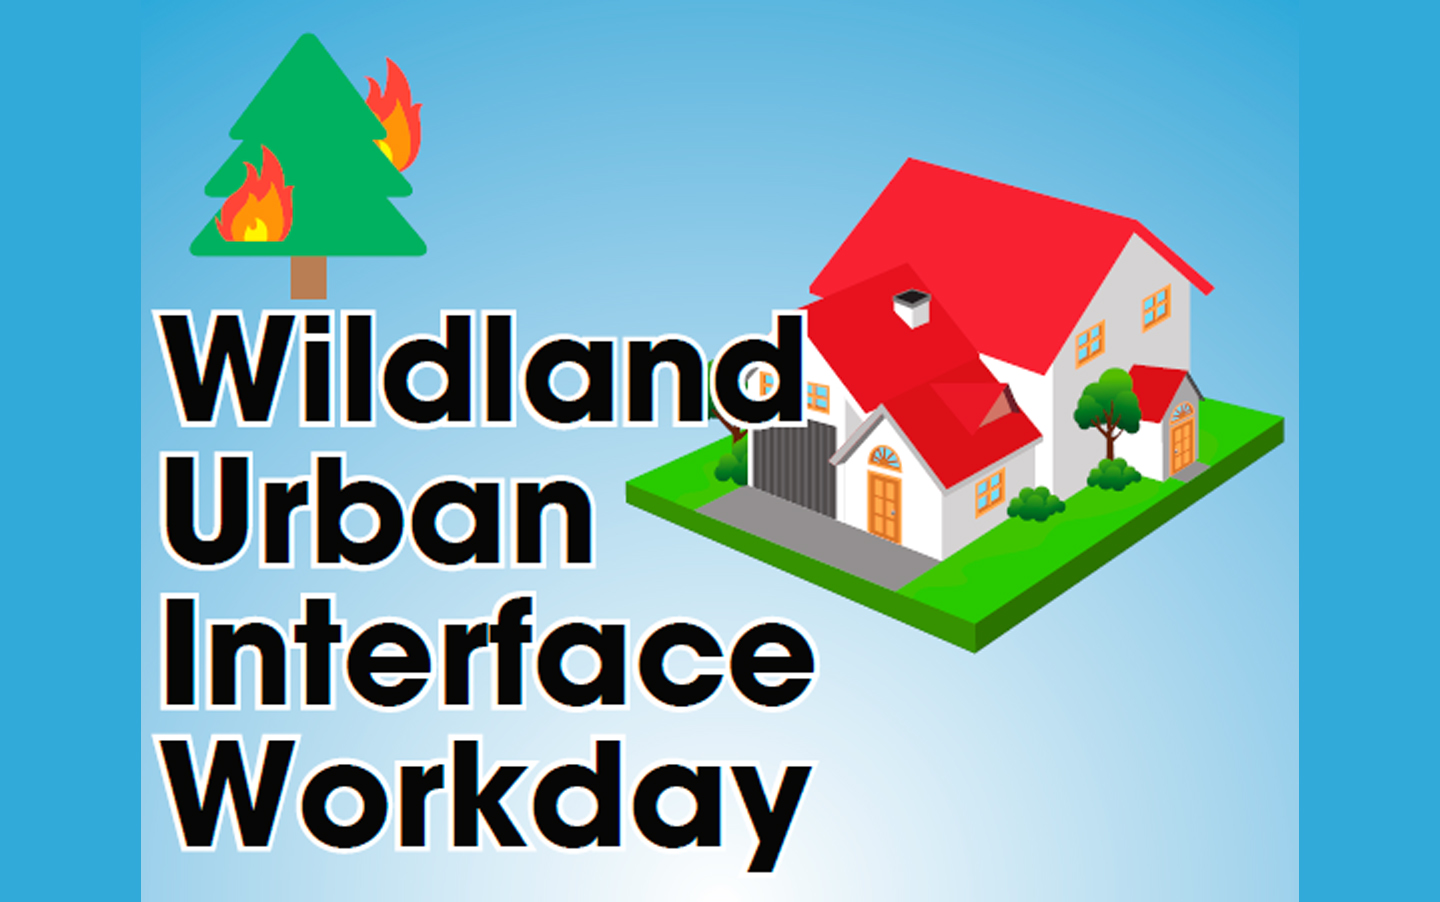 Wui Workday flier graphic